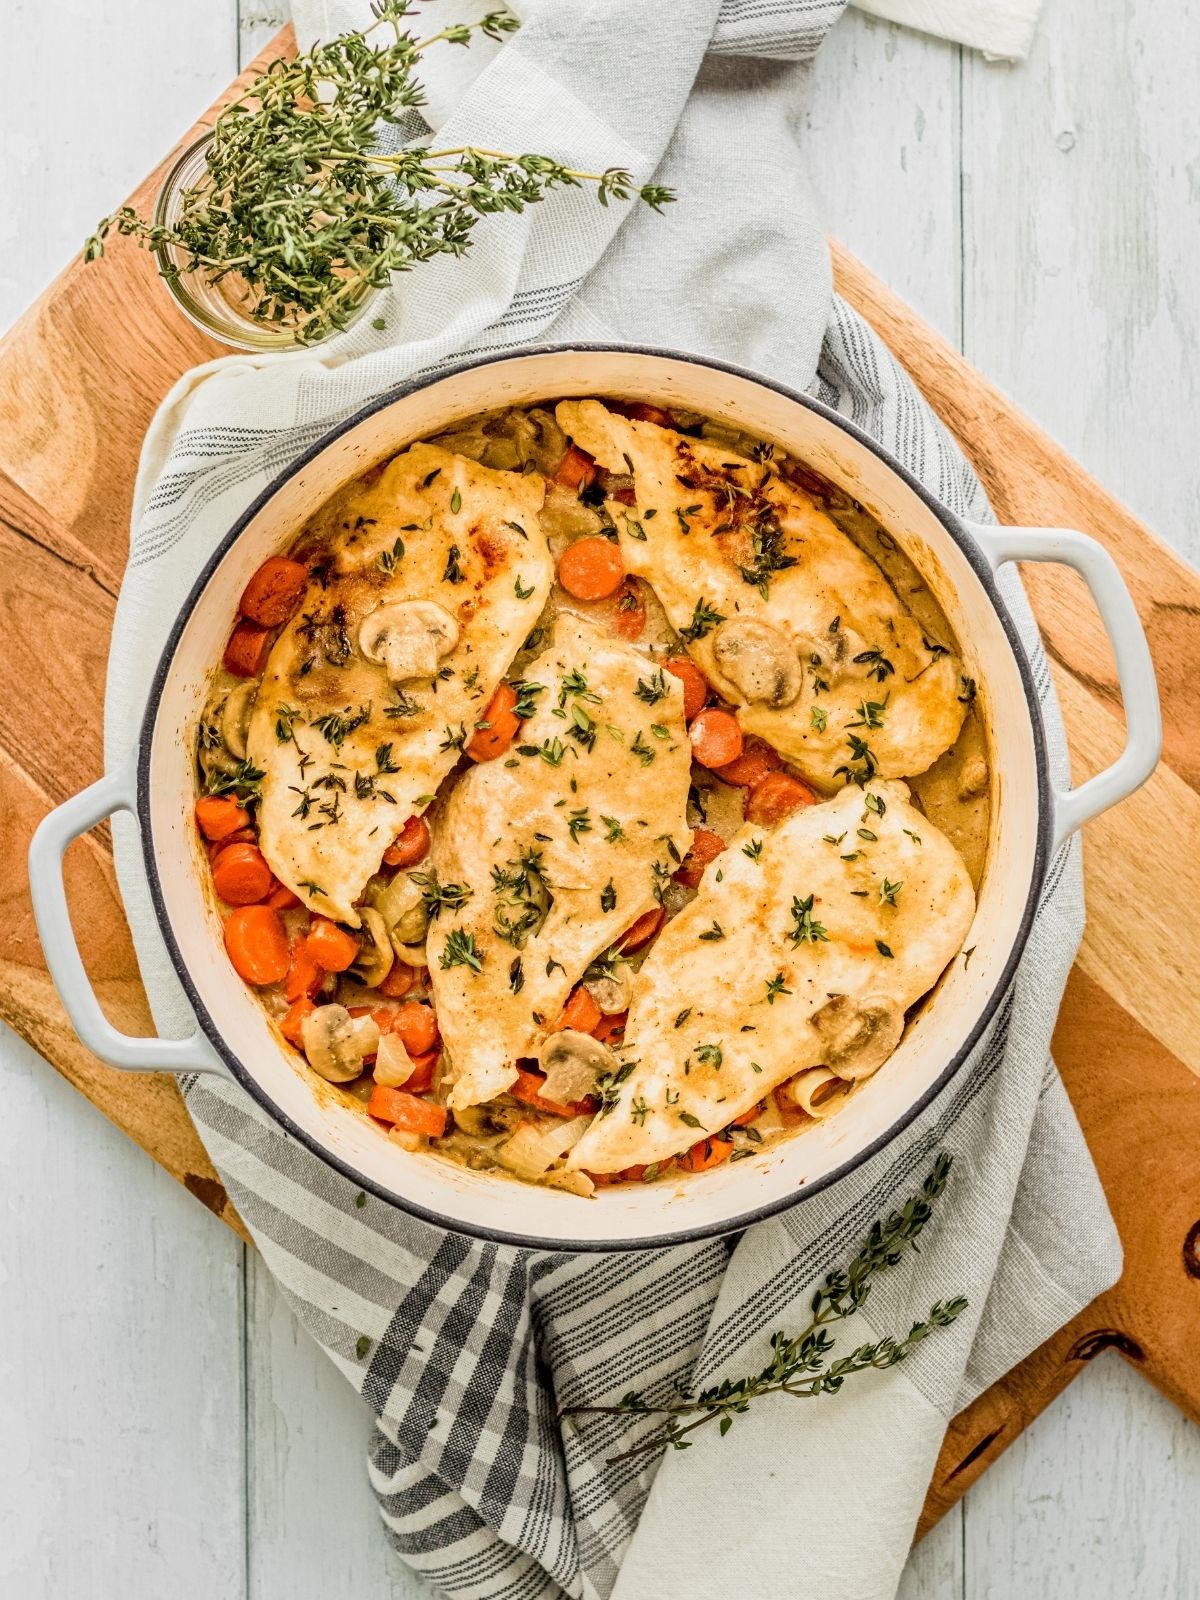 A dutch oven full of chicken breast and vegetables.